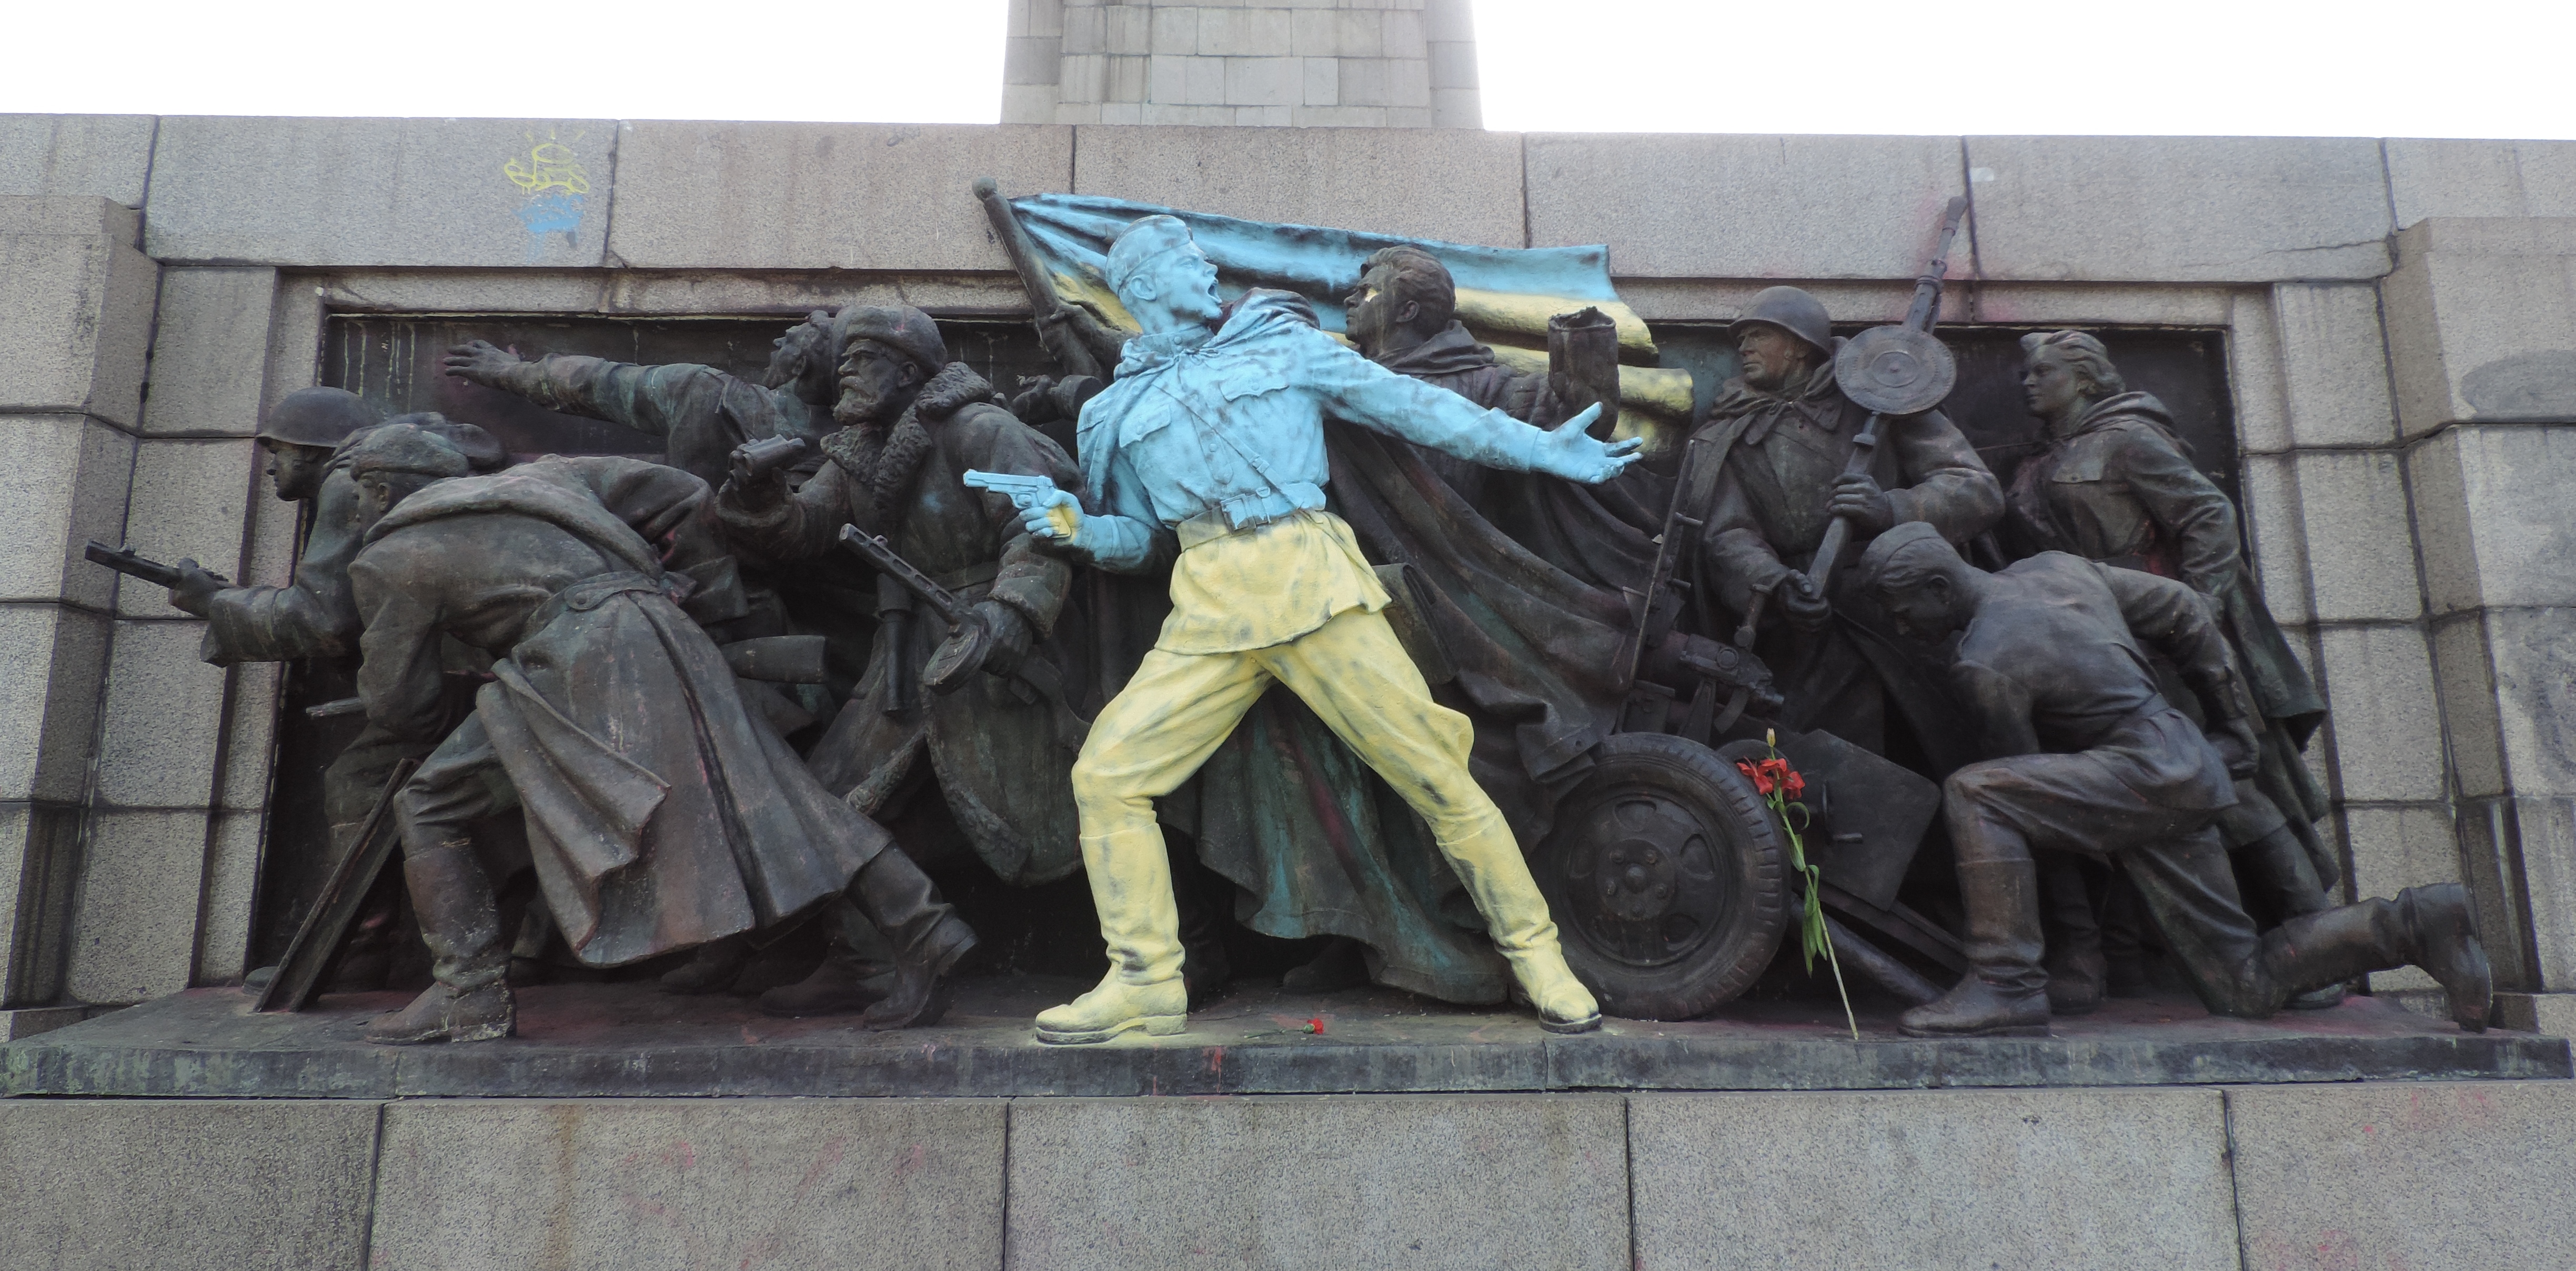 The Sofia Monument to the Soviet Army painted in the colors of the Ukrainian flag din support of the 2014 Ukrainian Revolution.